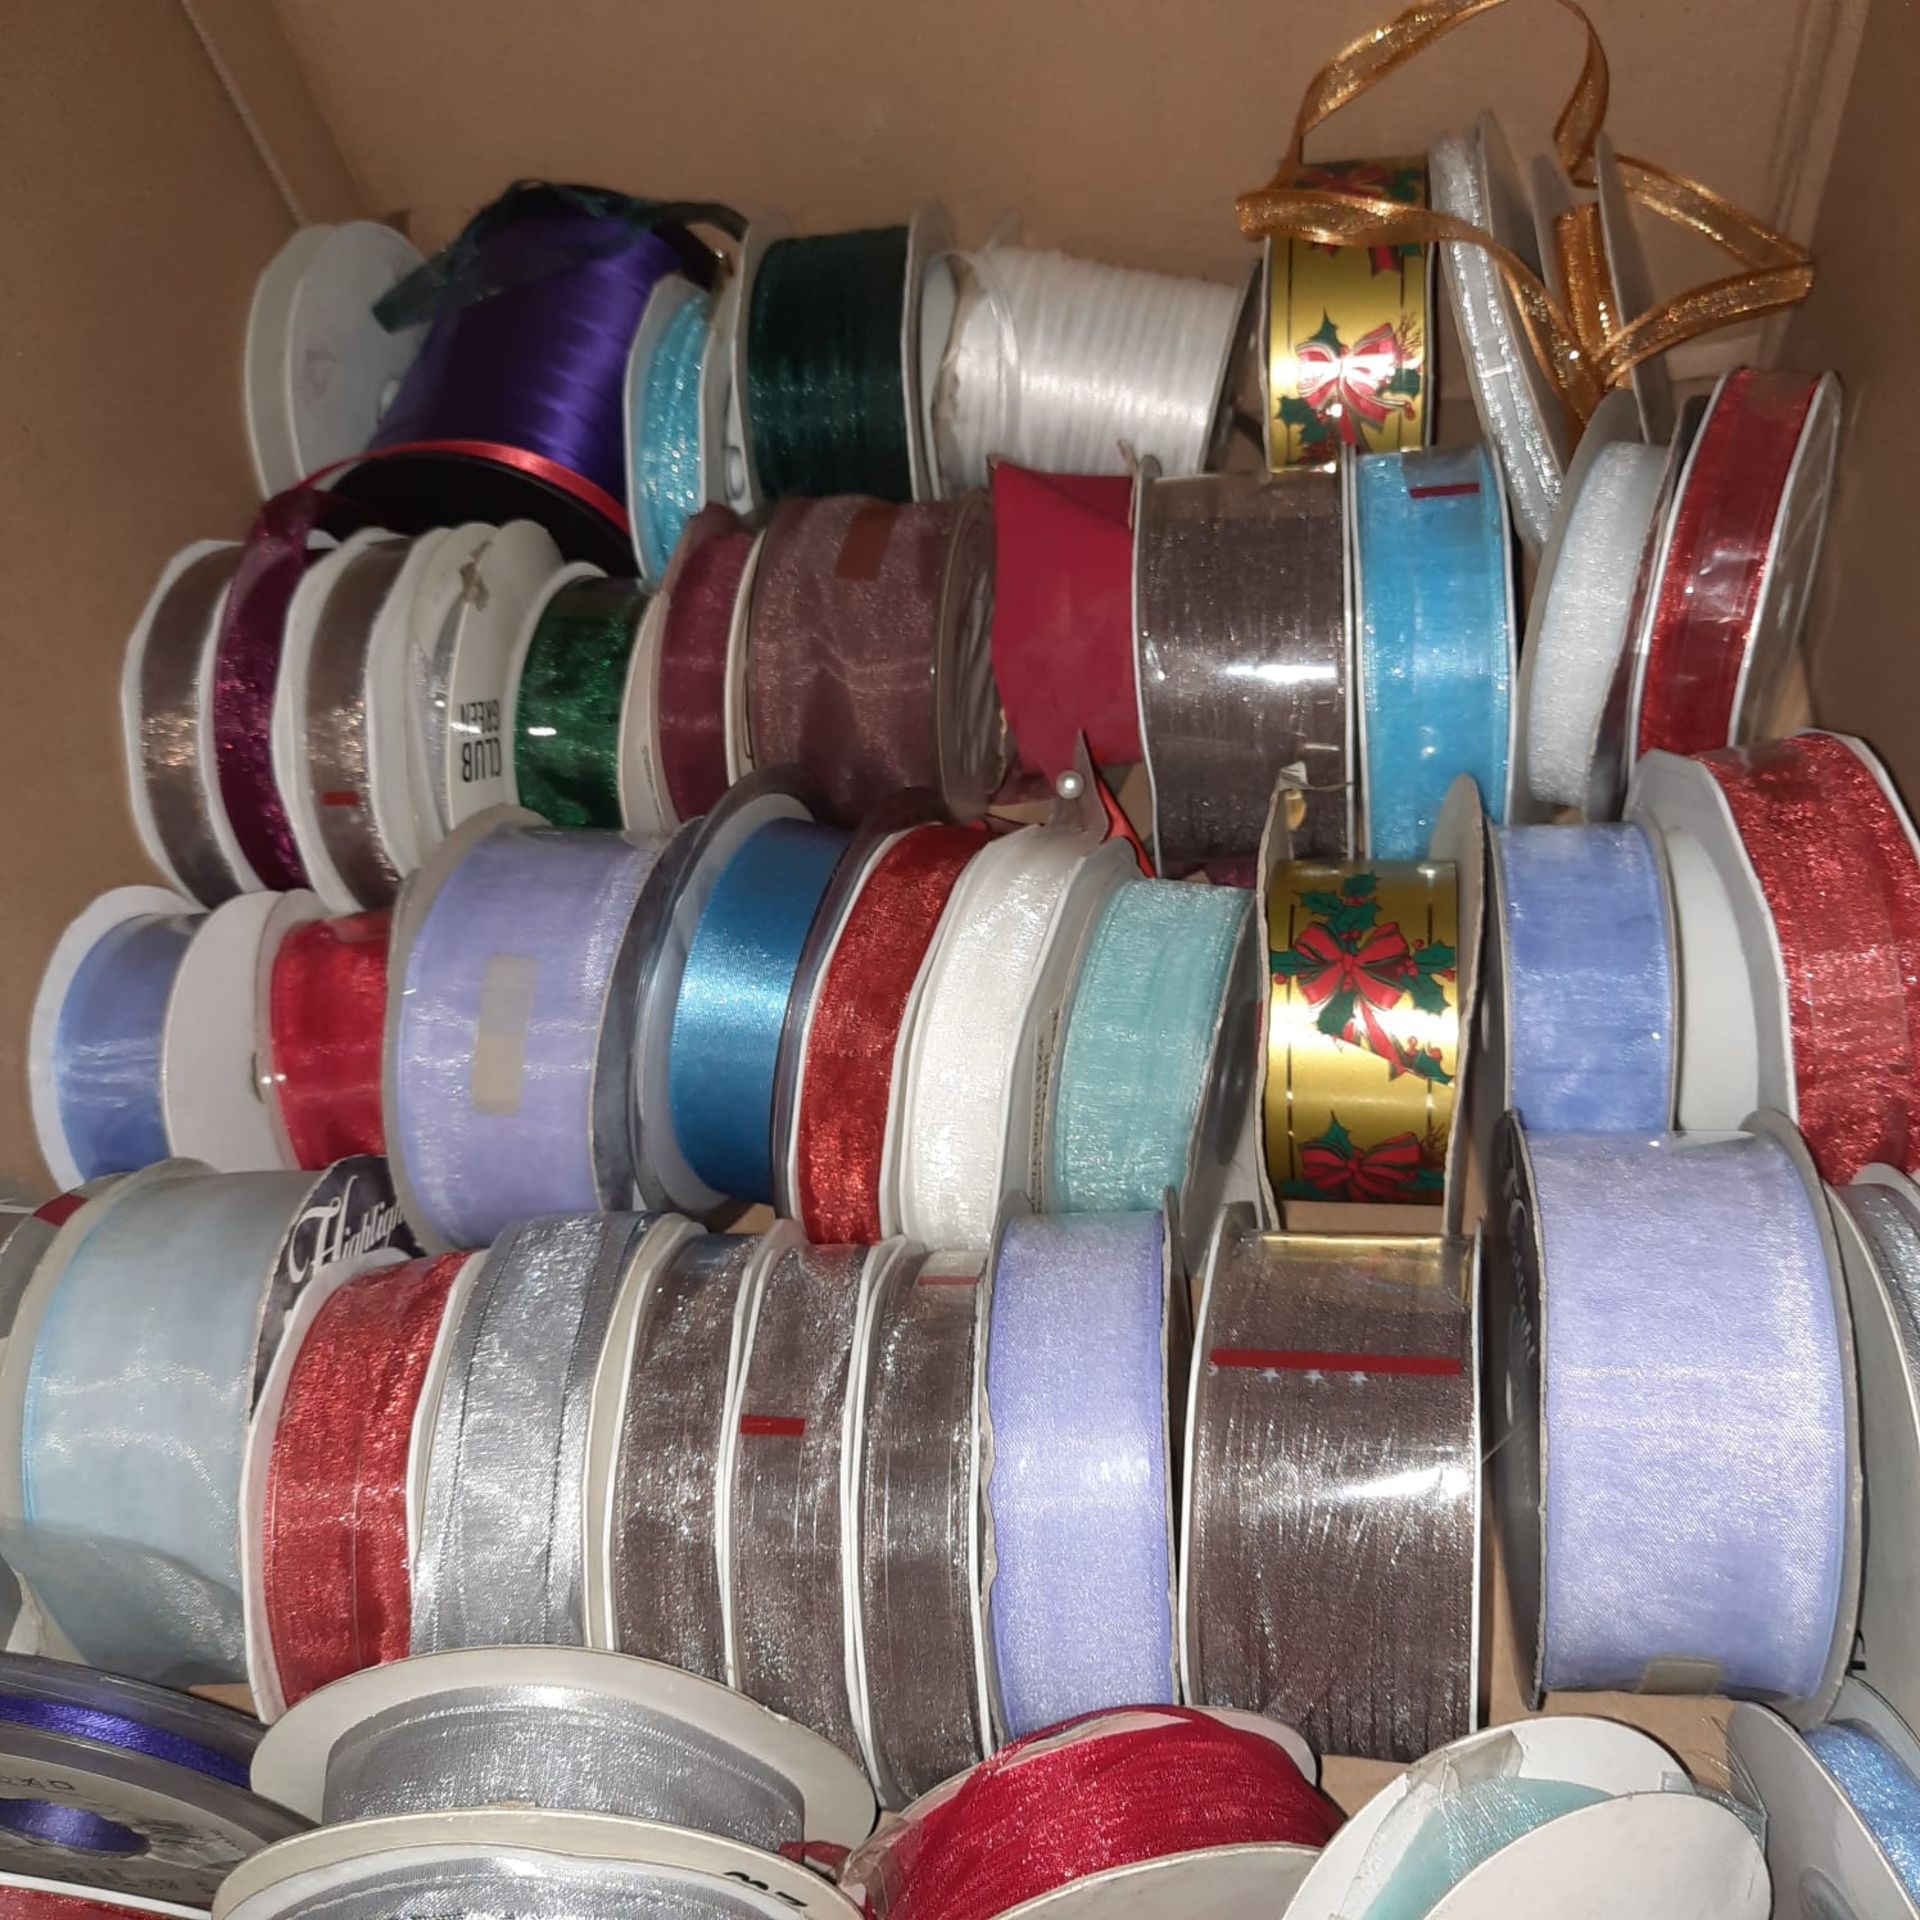 X 50 RIBBONS IN VARIOUS COLOURS, DESIGN AND SIZES - MIX CONDITIONS - SALEROOM ON TOP OF ROW (C).